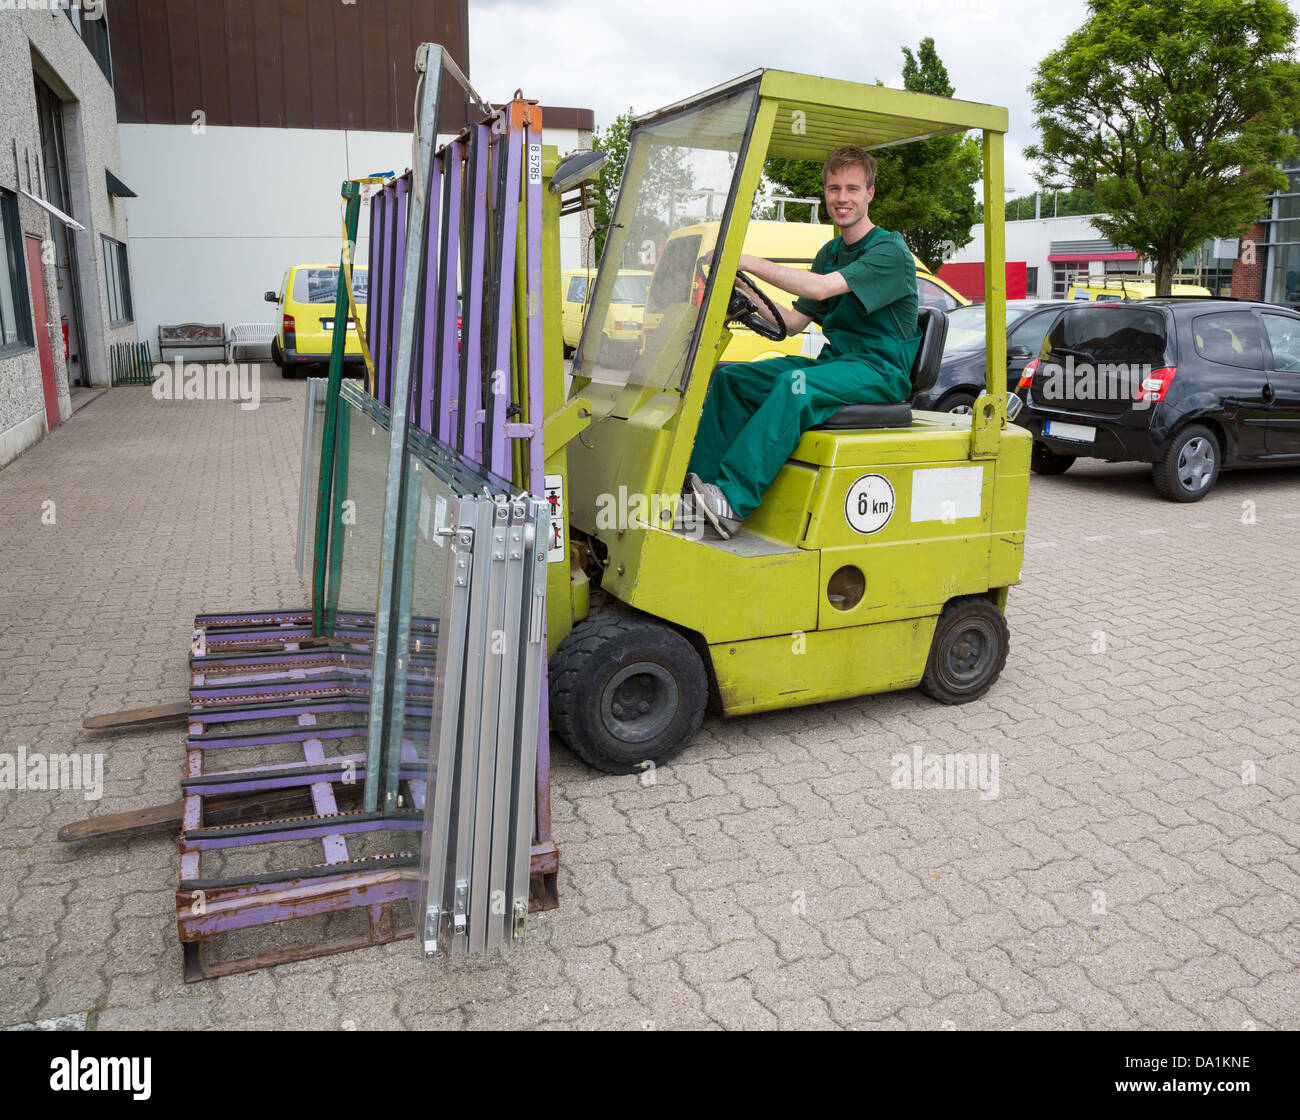 Glazier operating a forklift truck loaded with panes of glass Stock Photo